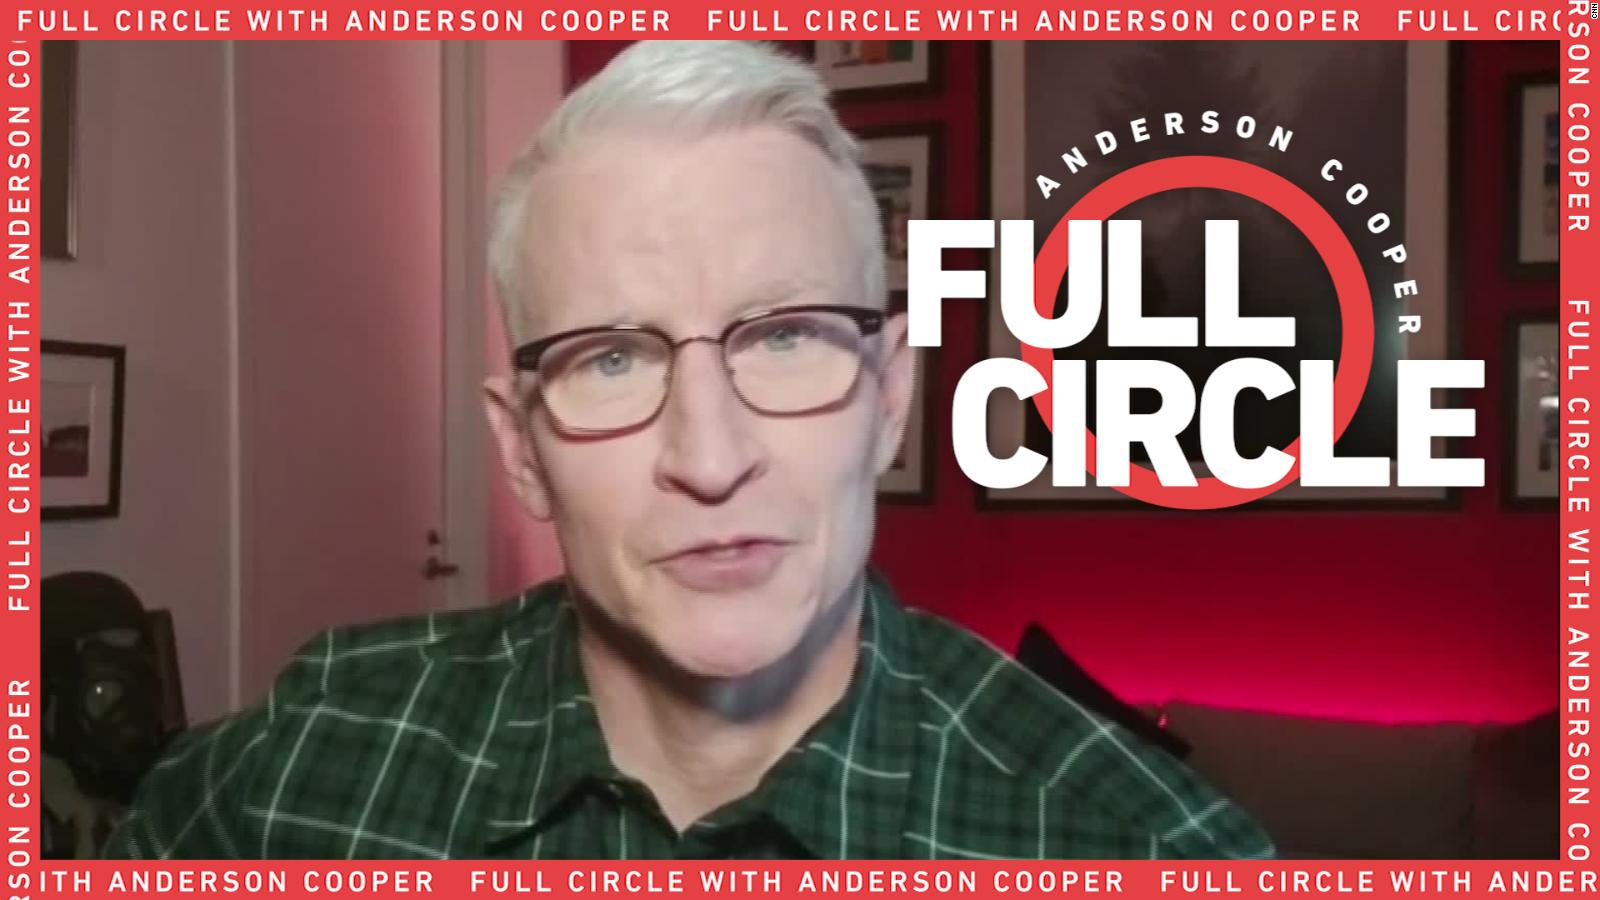 Anderson Cooper on how he reacts when someone lies in an interview